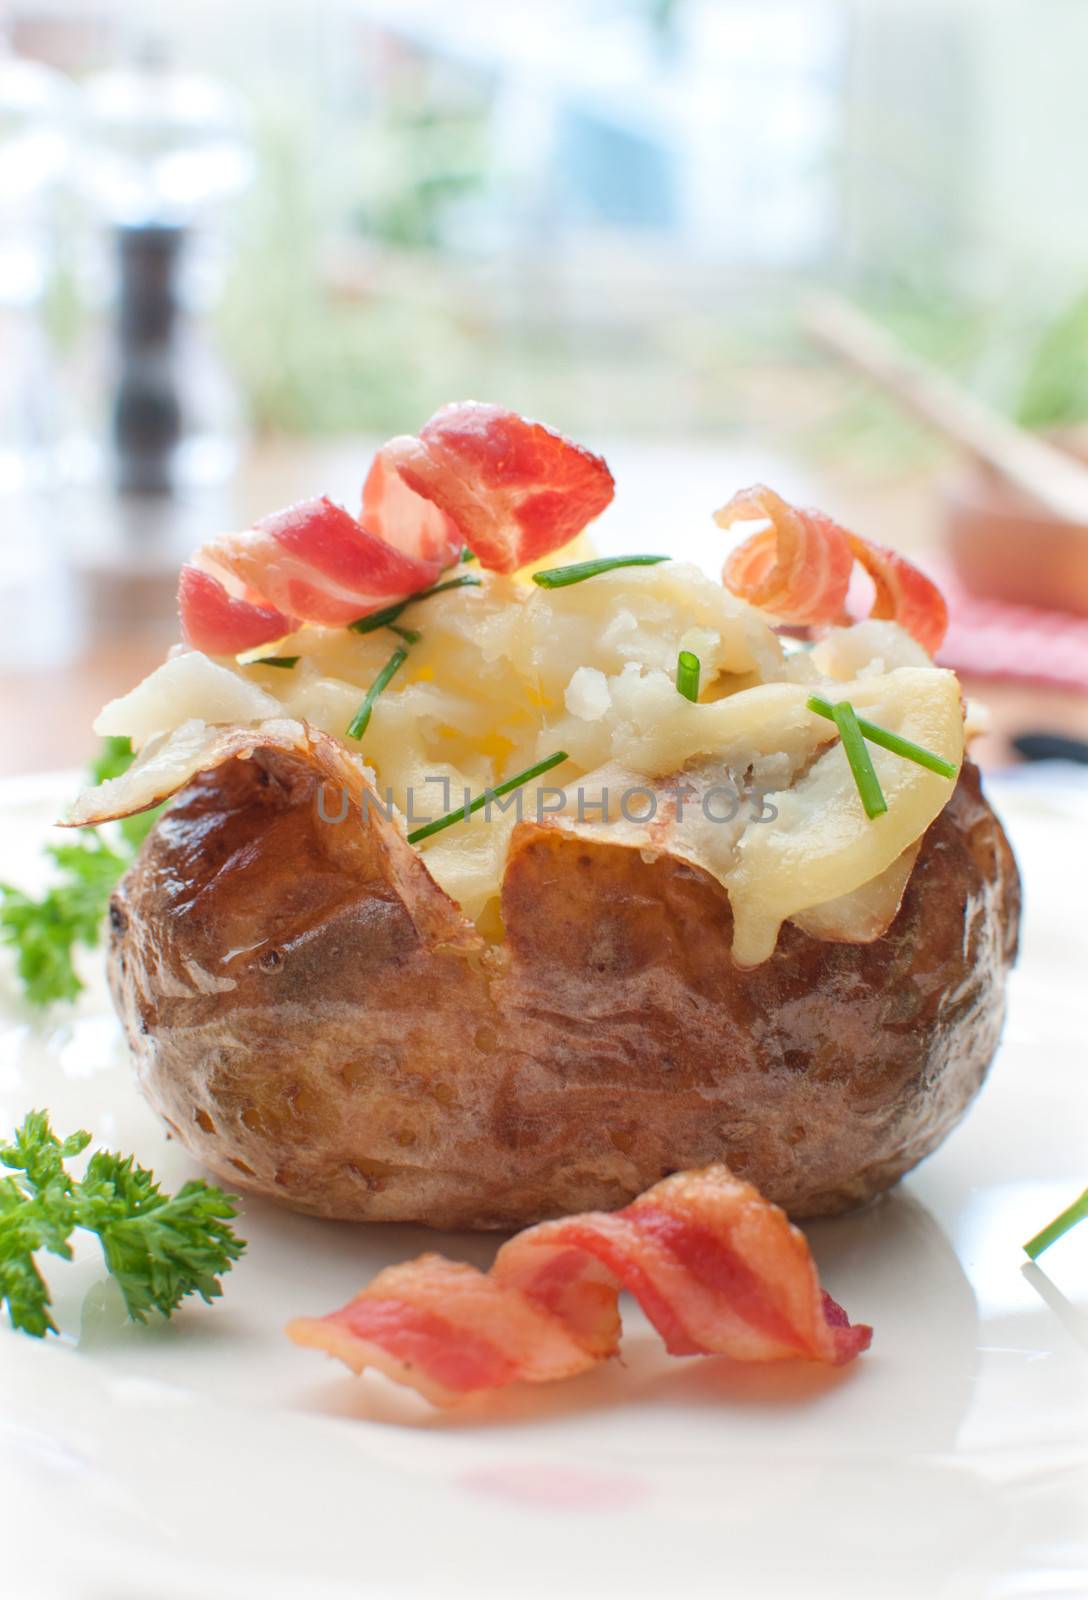 Hot potato with curly bacon and grated cheese 